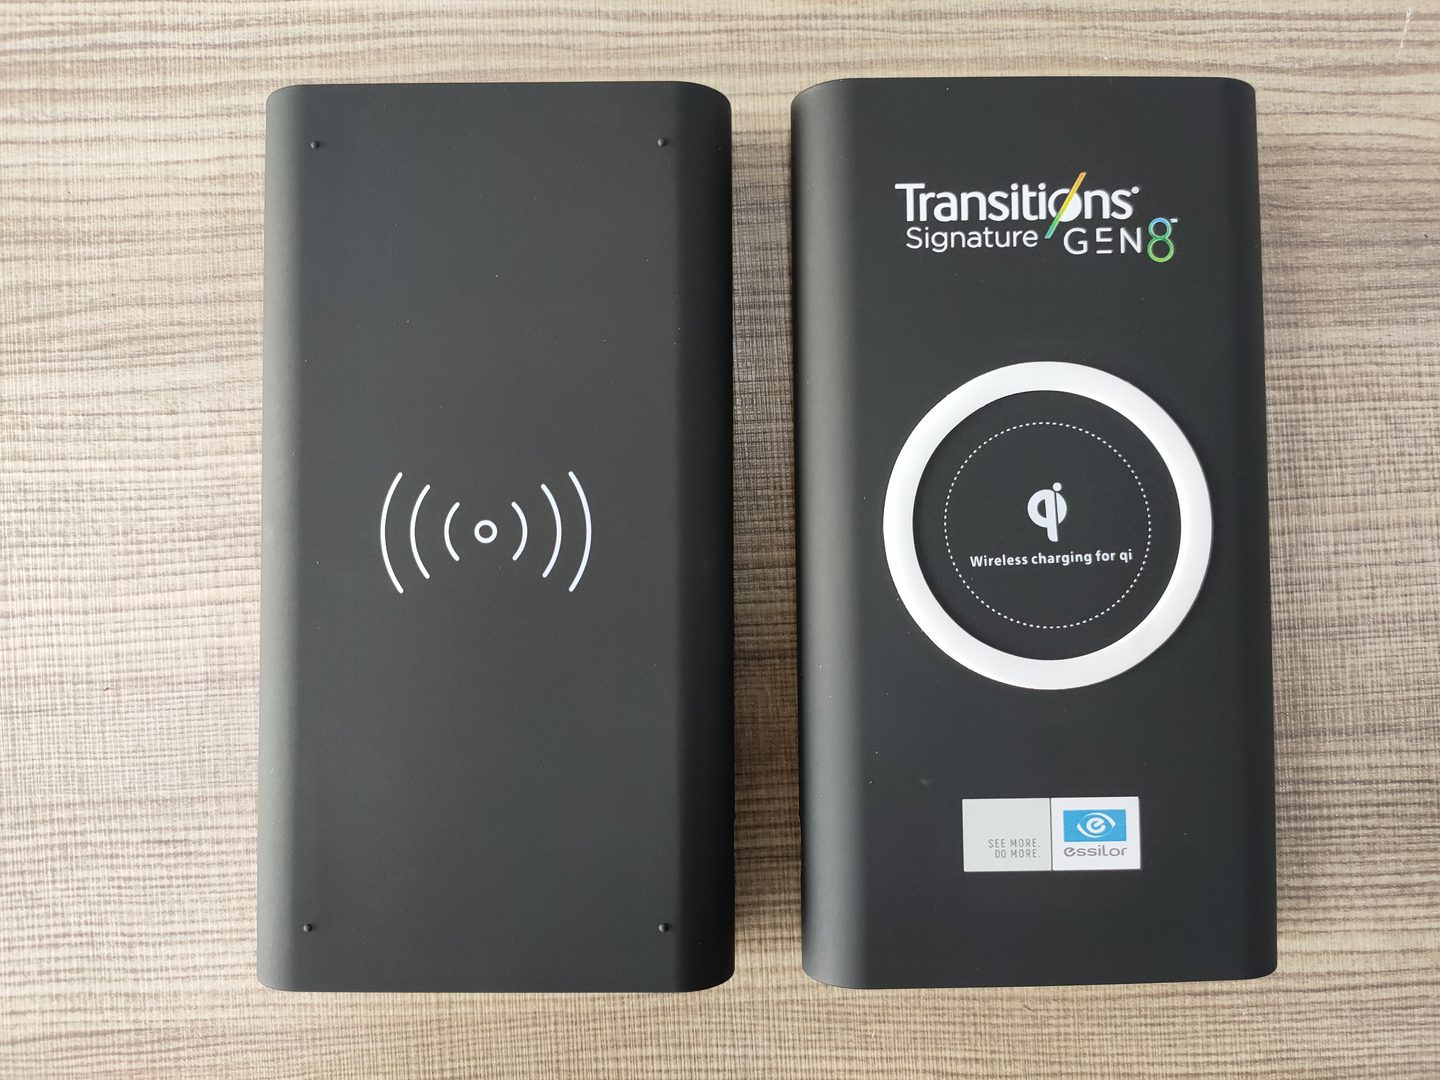 Two black Wireless Battery Chargers